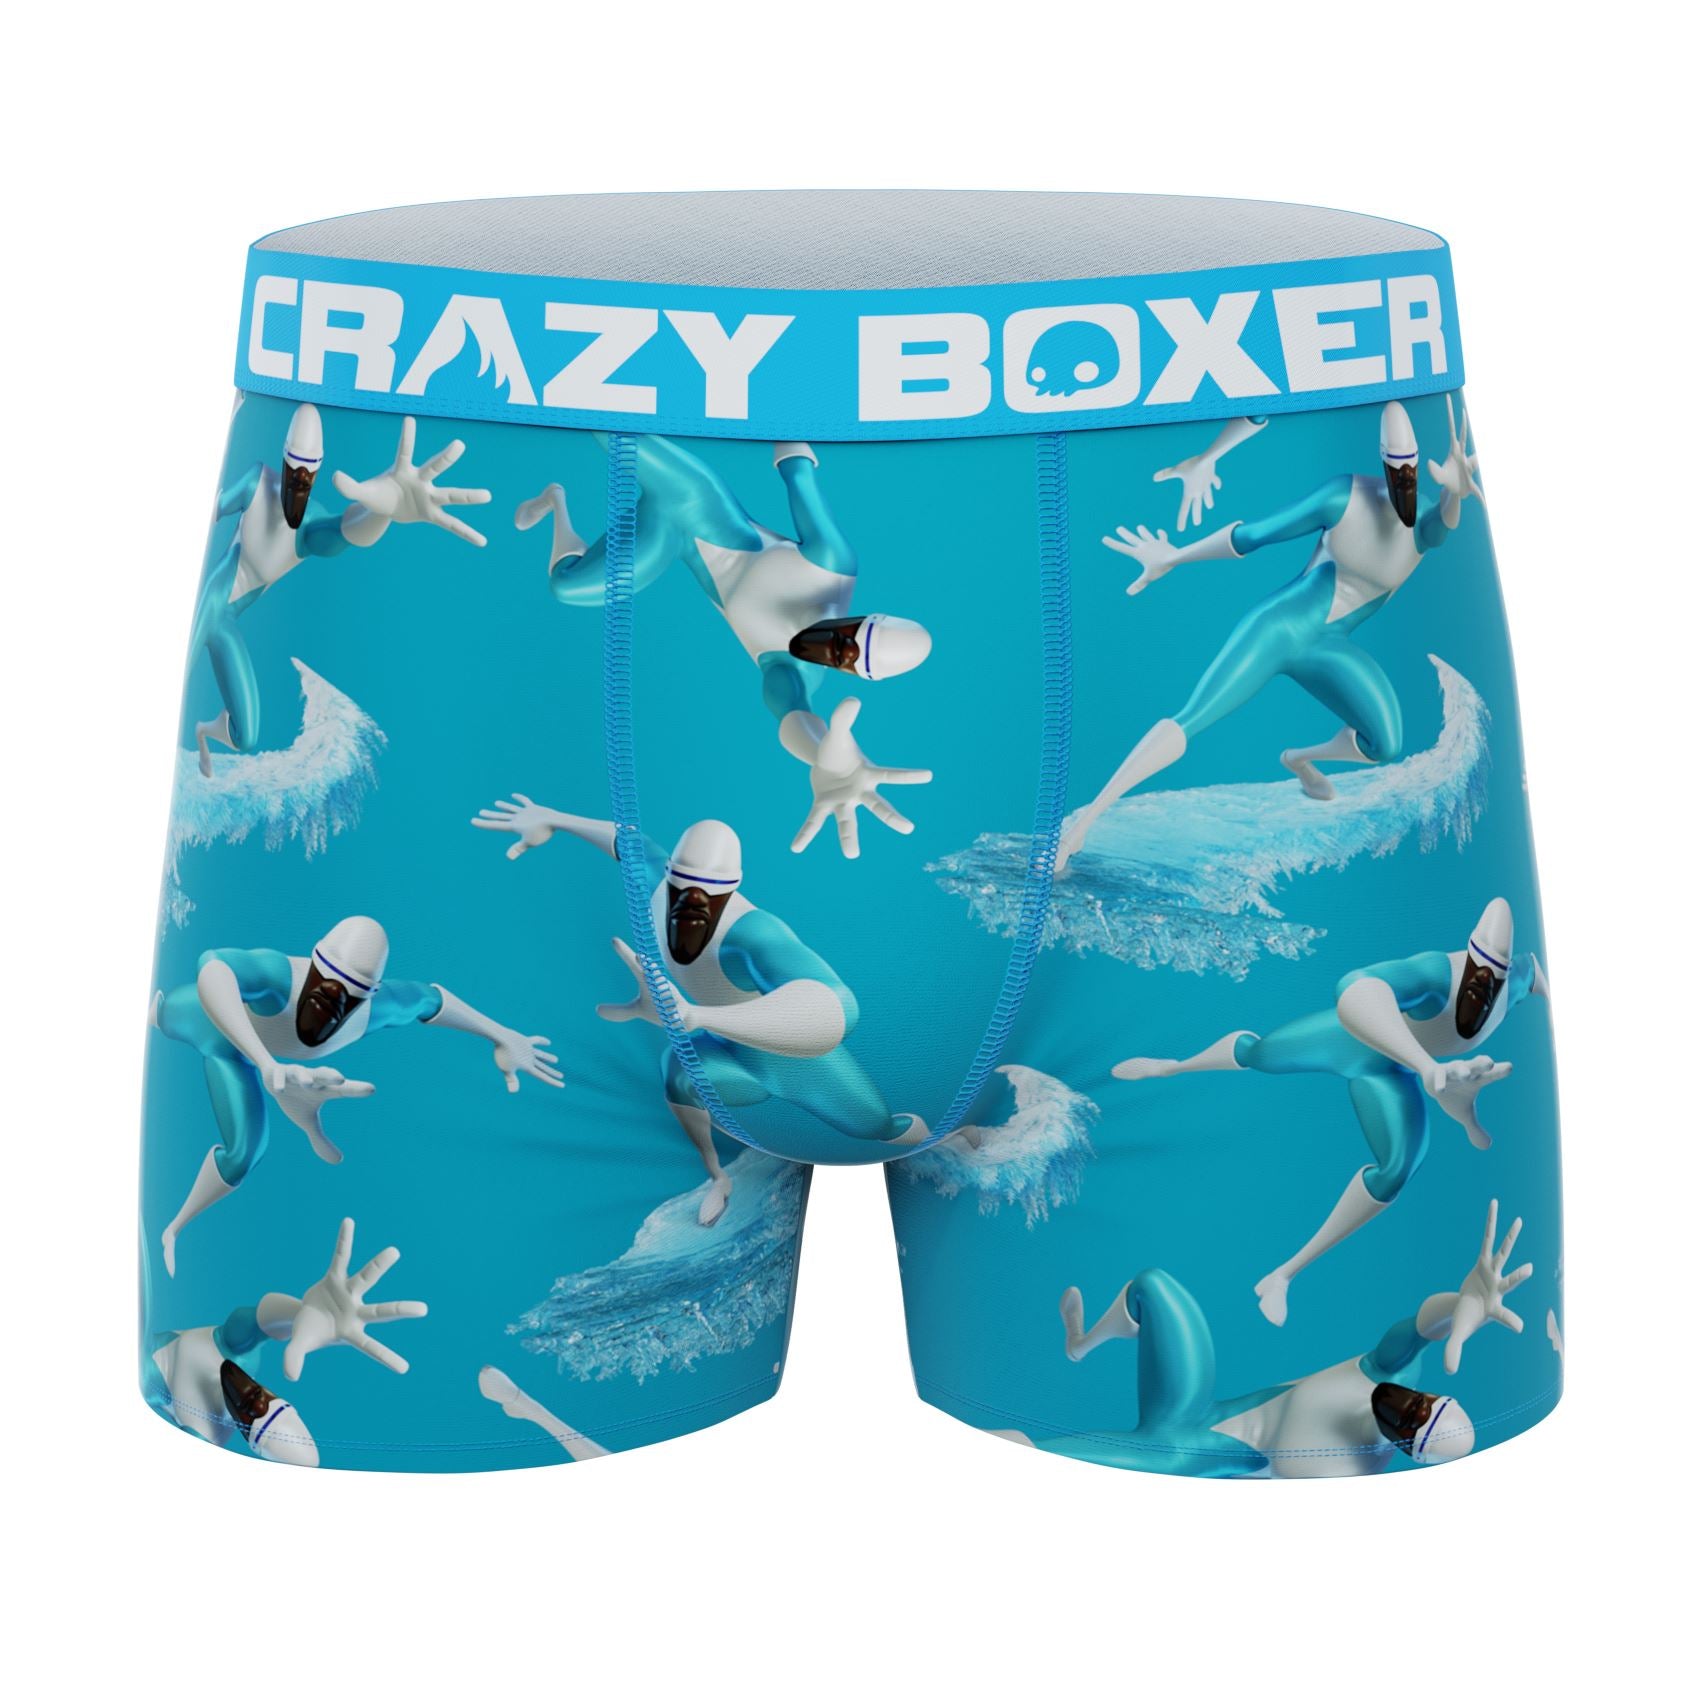 CRAZYBOXER Crazy Boxers Kellogg's Froot Loops Toucan Sam Boxer Briefs  XLarge (40-42) Red